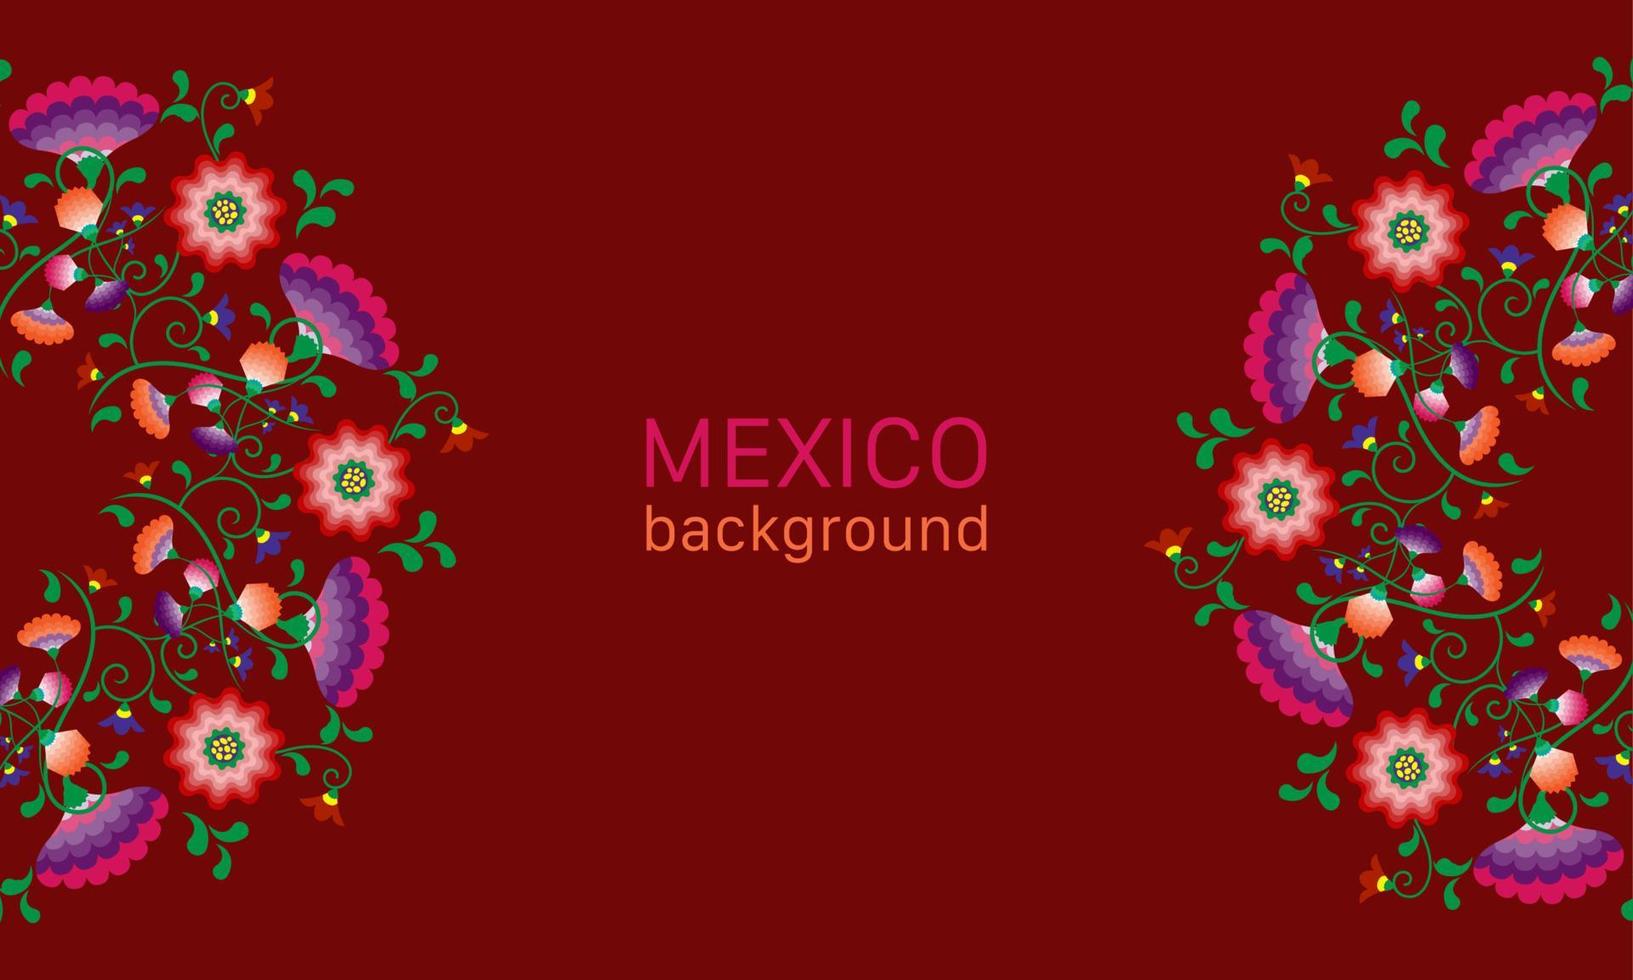 Embroidery native flowers folk pattern with Polish and Mexican influence. Trendy ethnic decorative traditional floral in symmetric design, for fashion, interior, stationery. Vector isolated on red